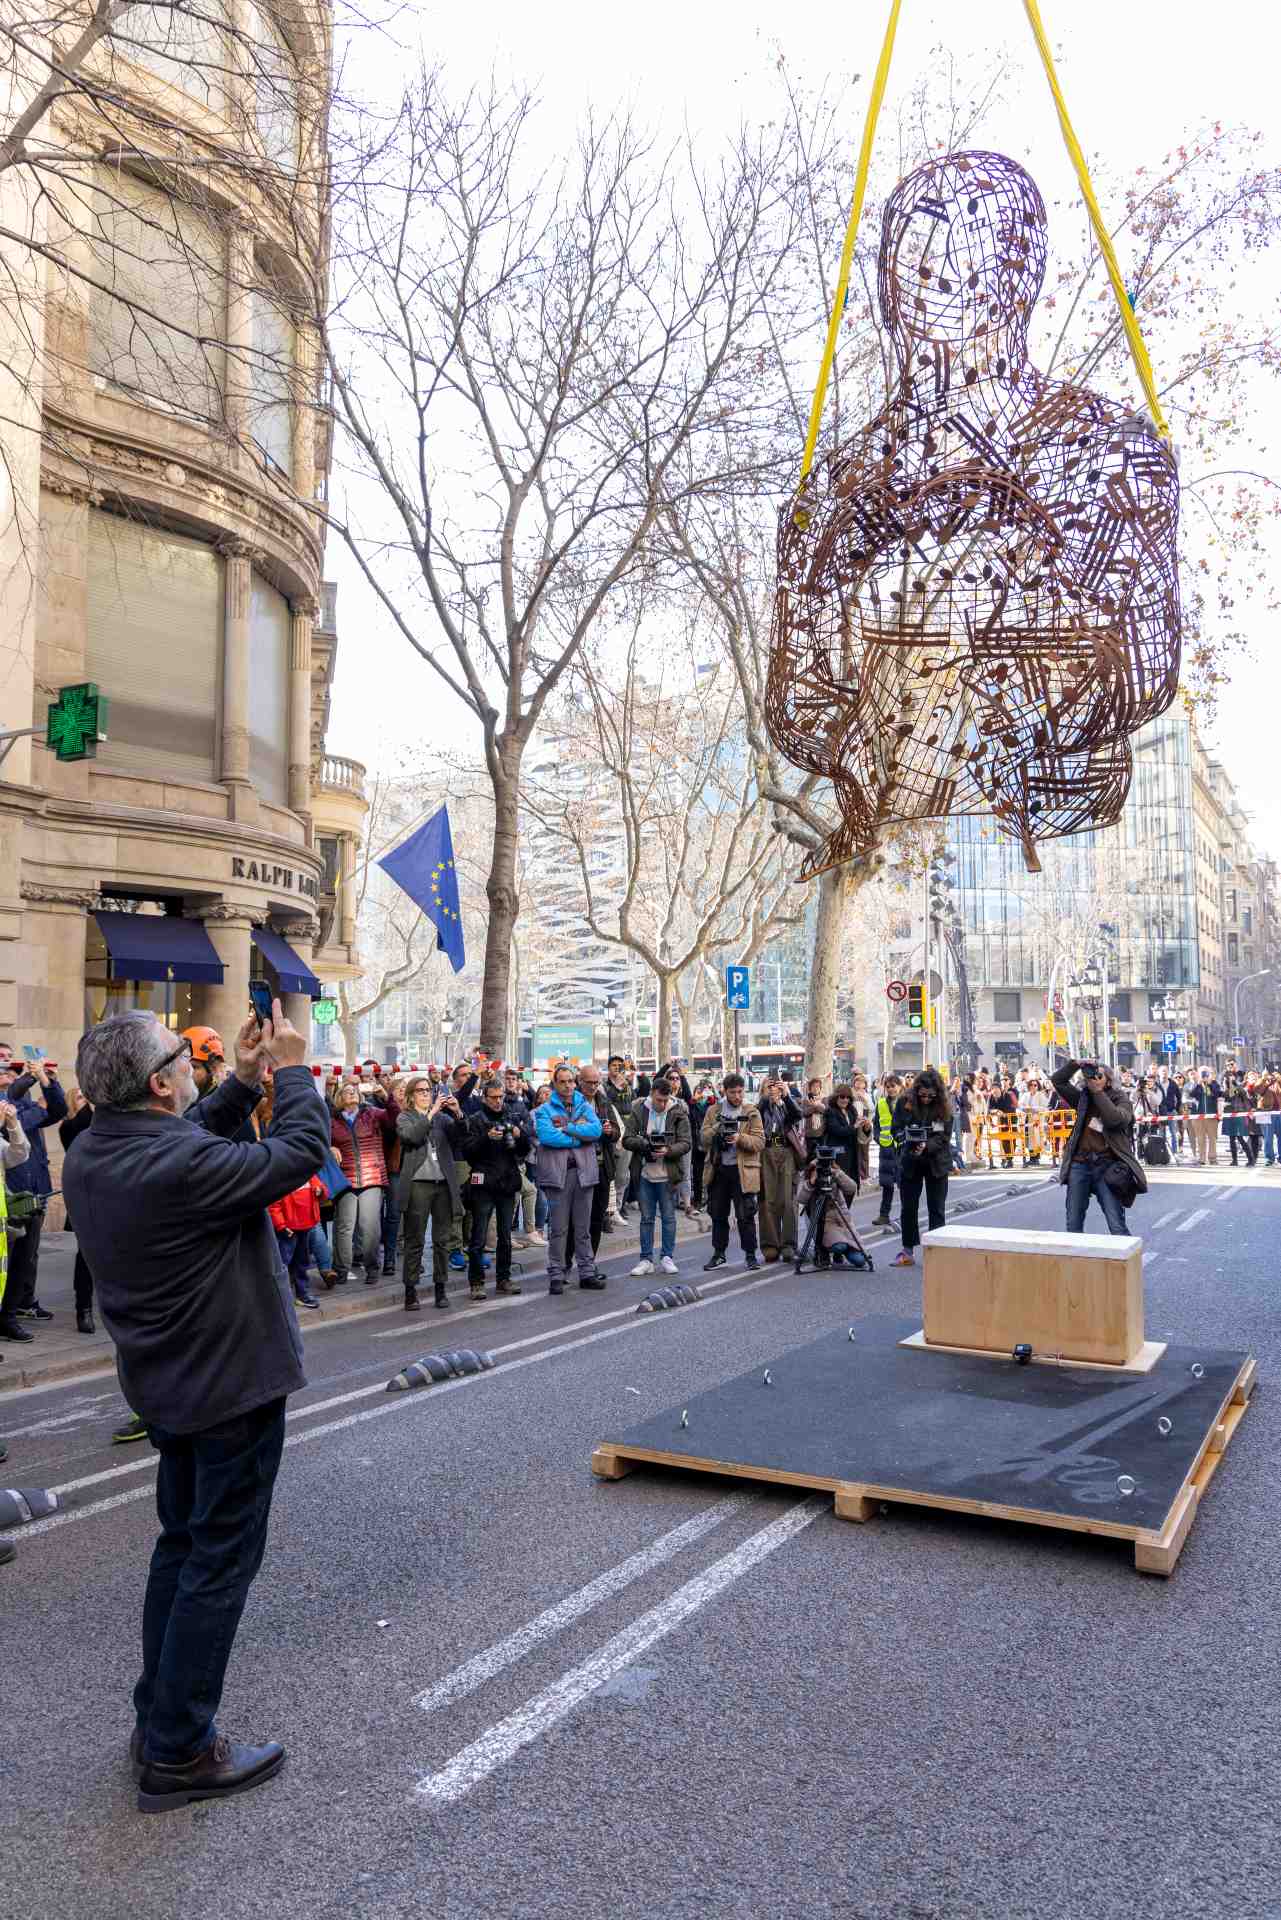 Image of people photographing a metal sculpture picked up by a crane